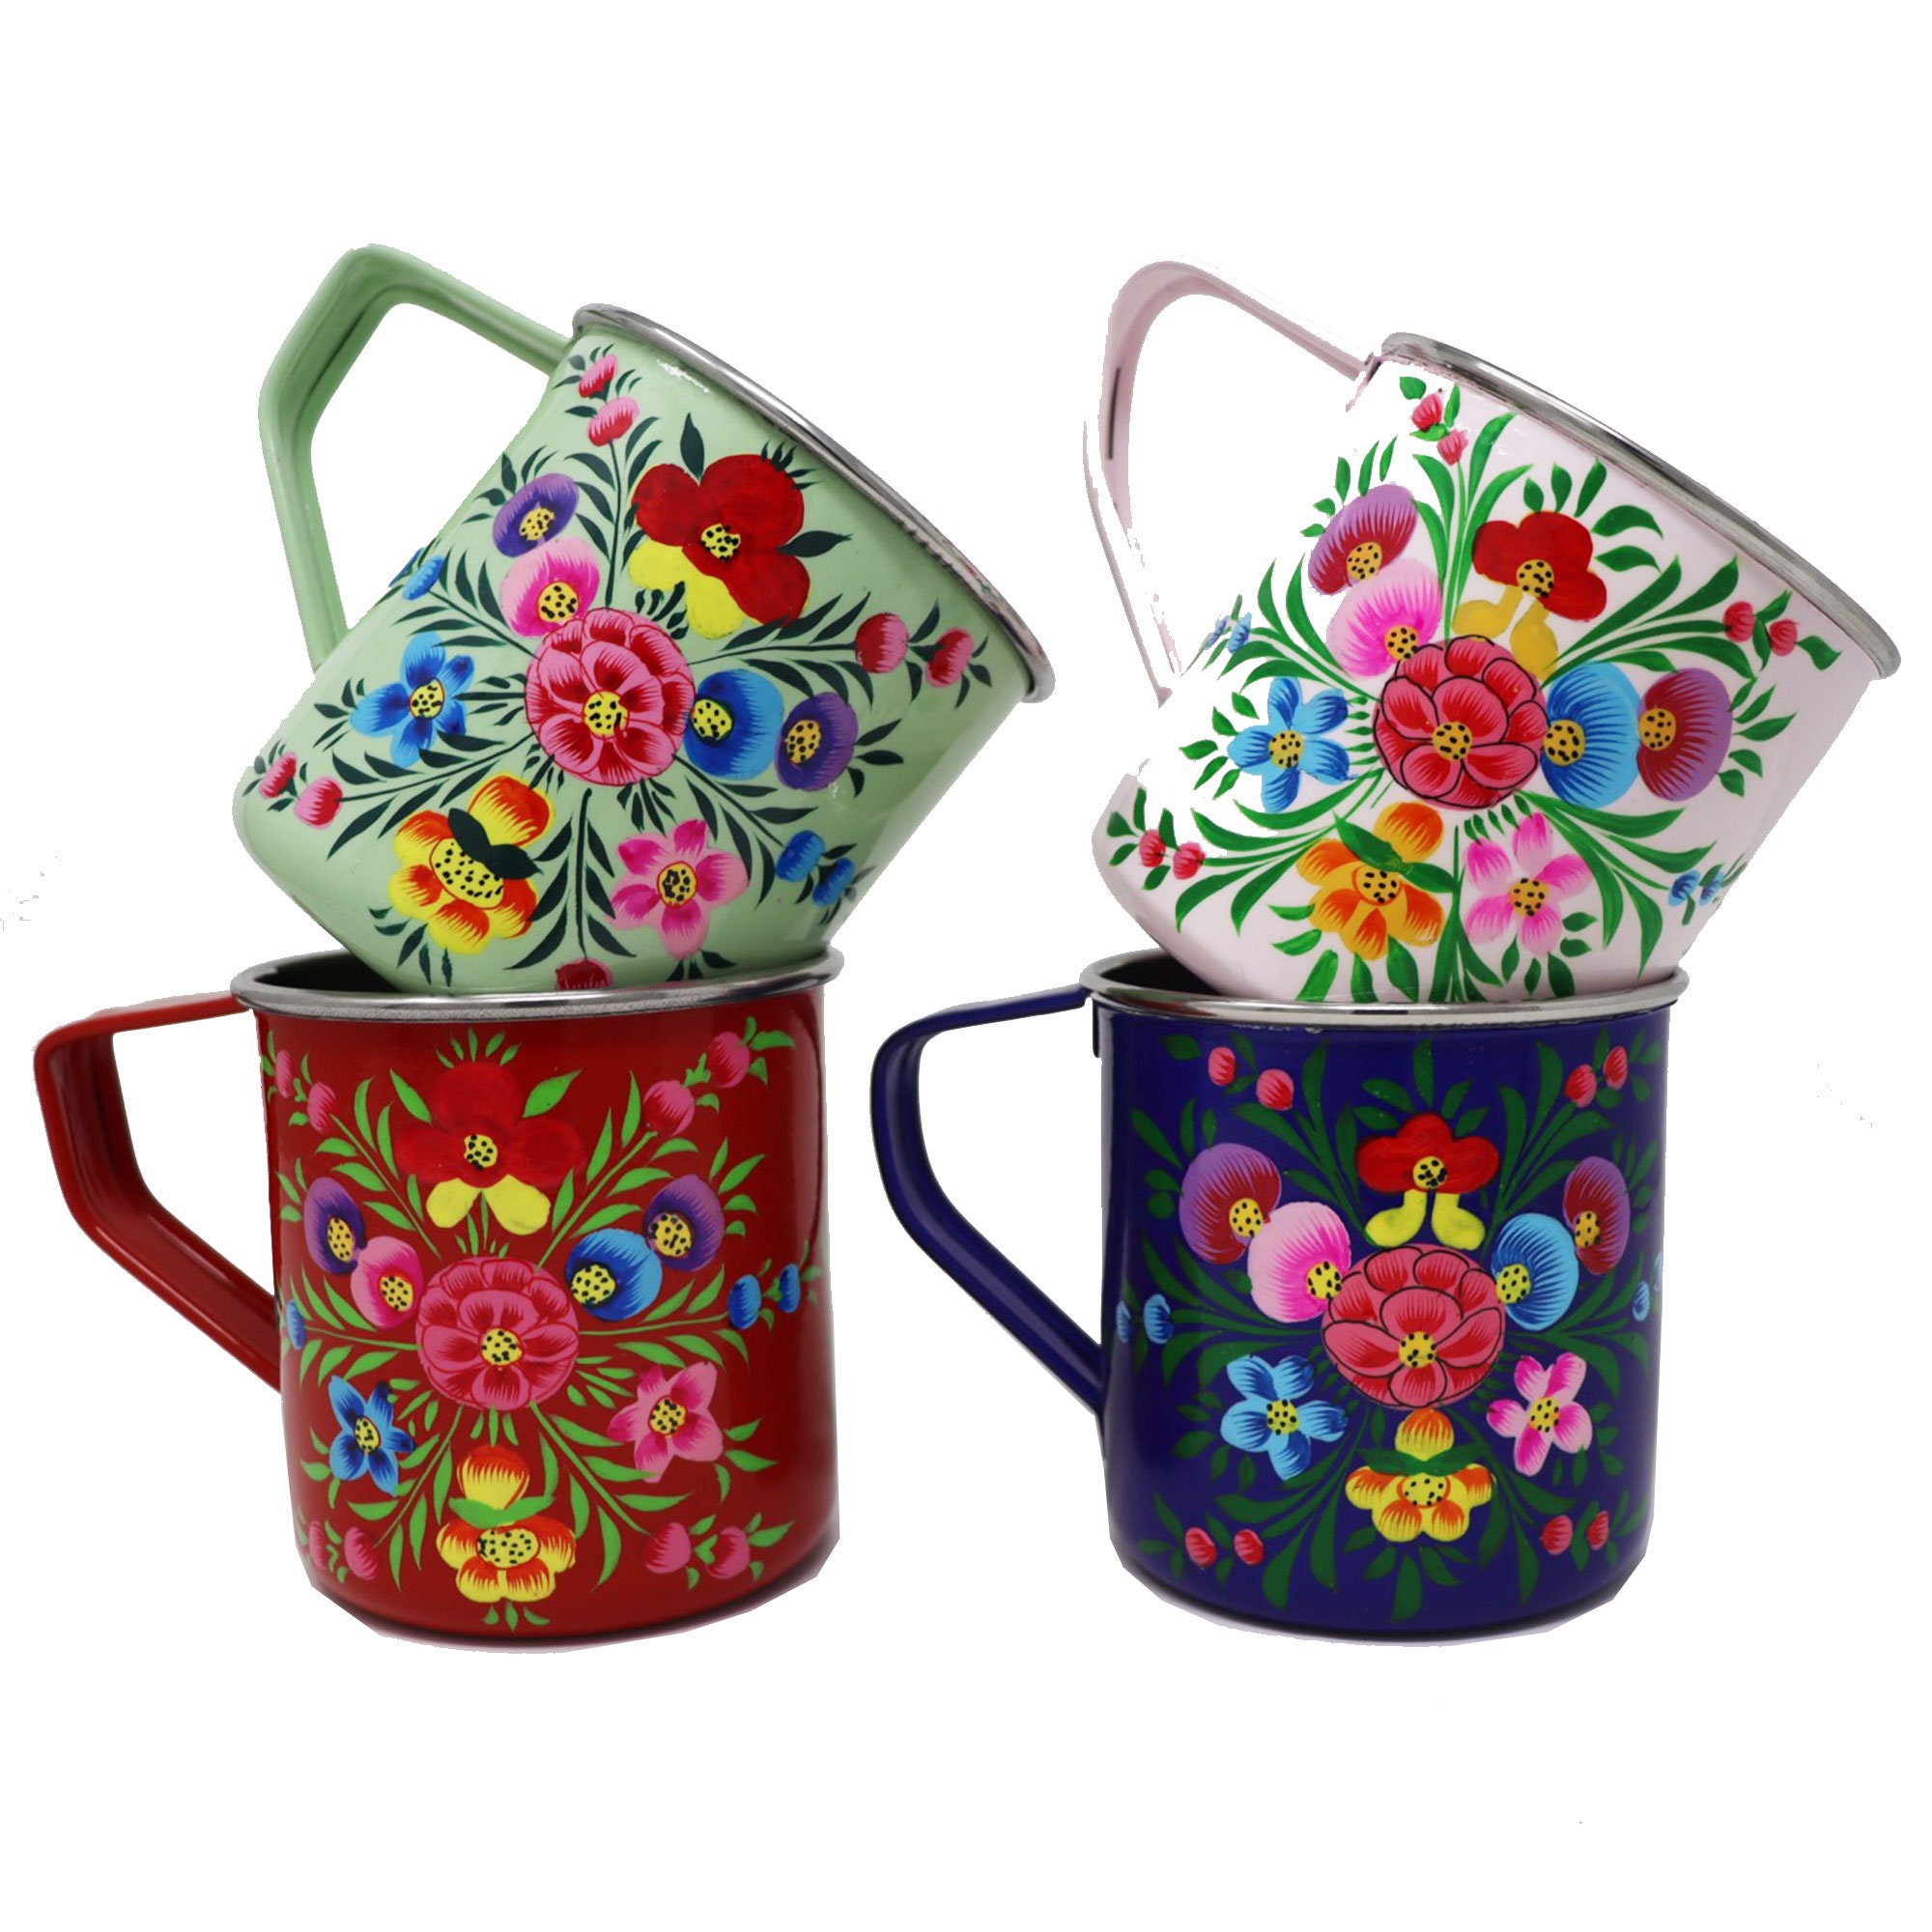 How To Make Holiday Mugs With Folk Art's Enamel Glass Paints 